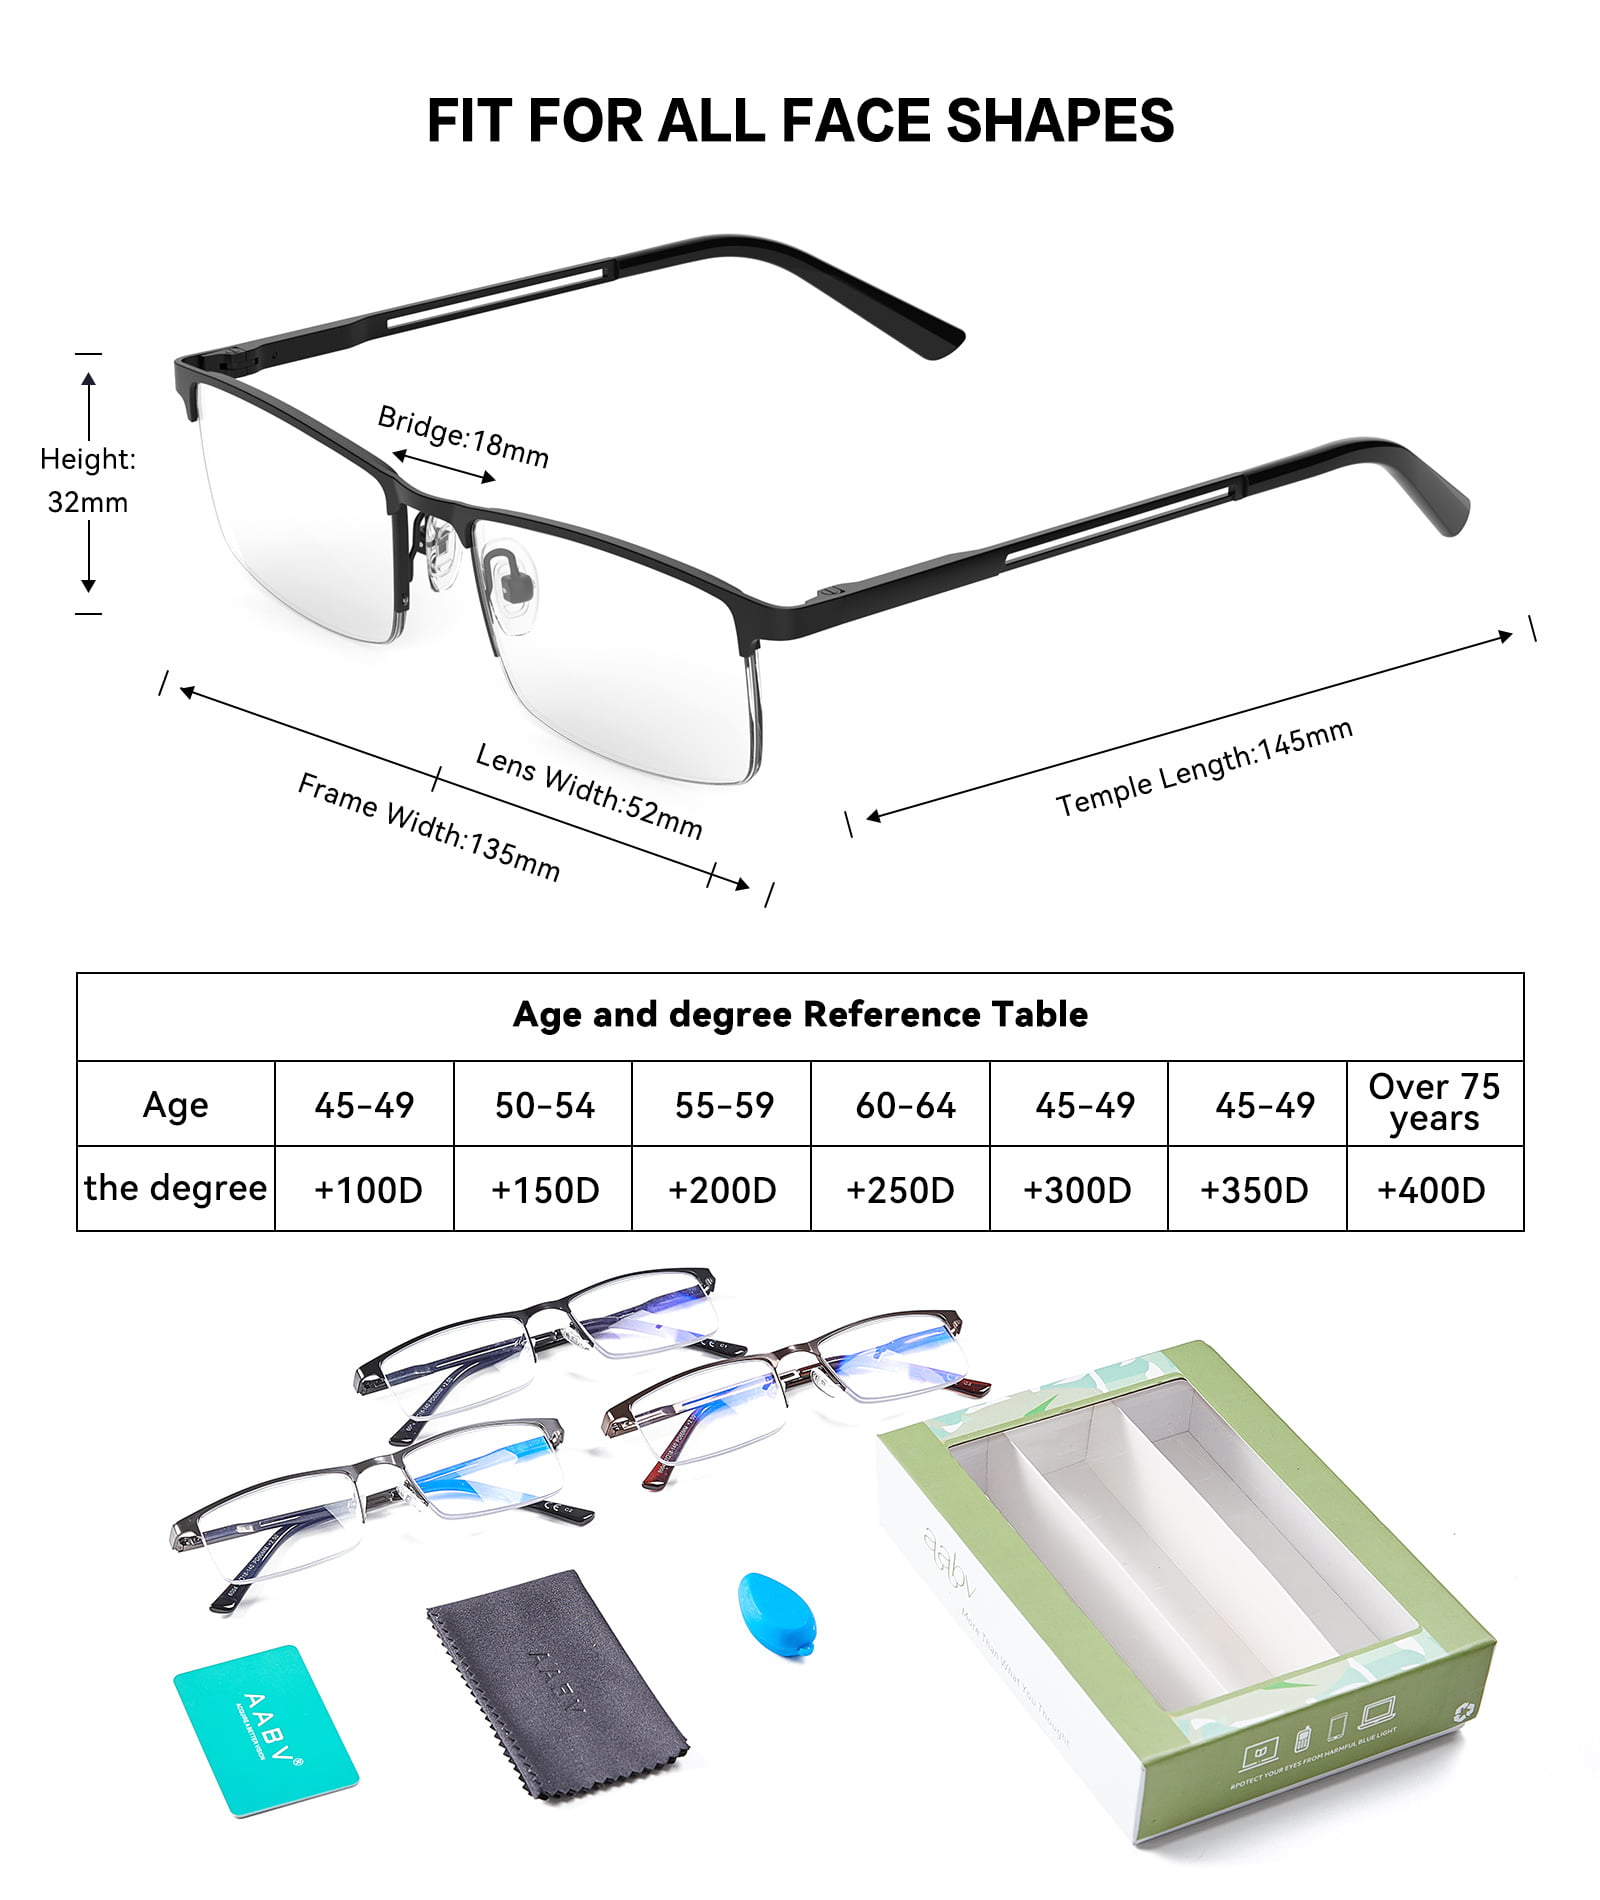 High strength quality Jewelers wire reading glasses 3.5 3.75 4 4.5 5.0 5.5  6.0